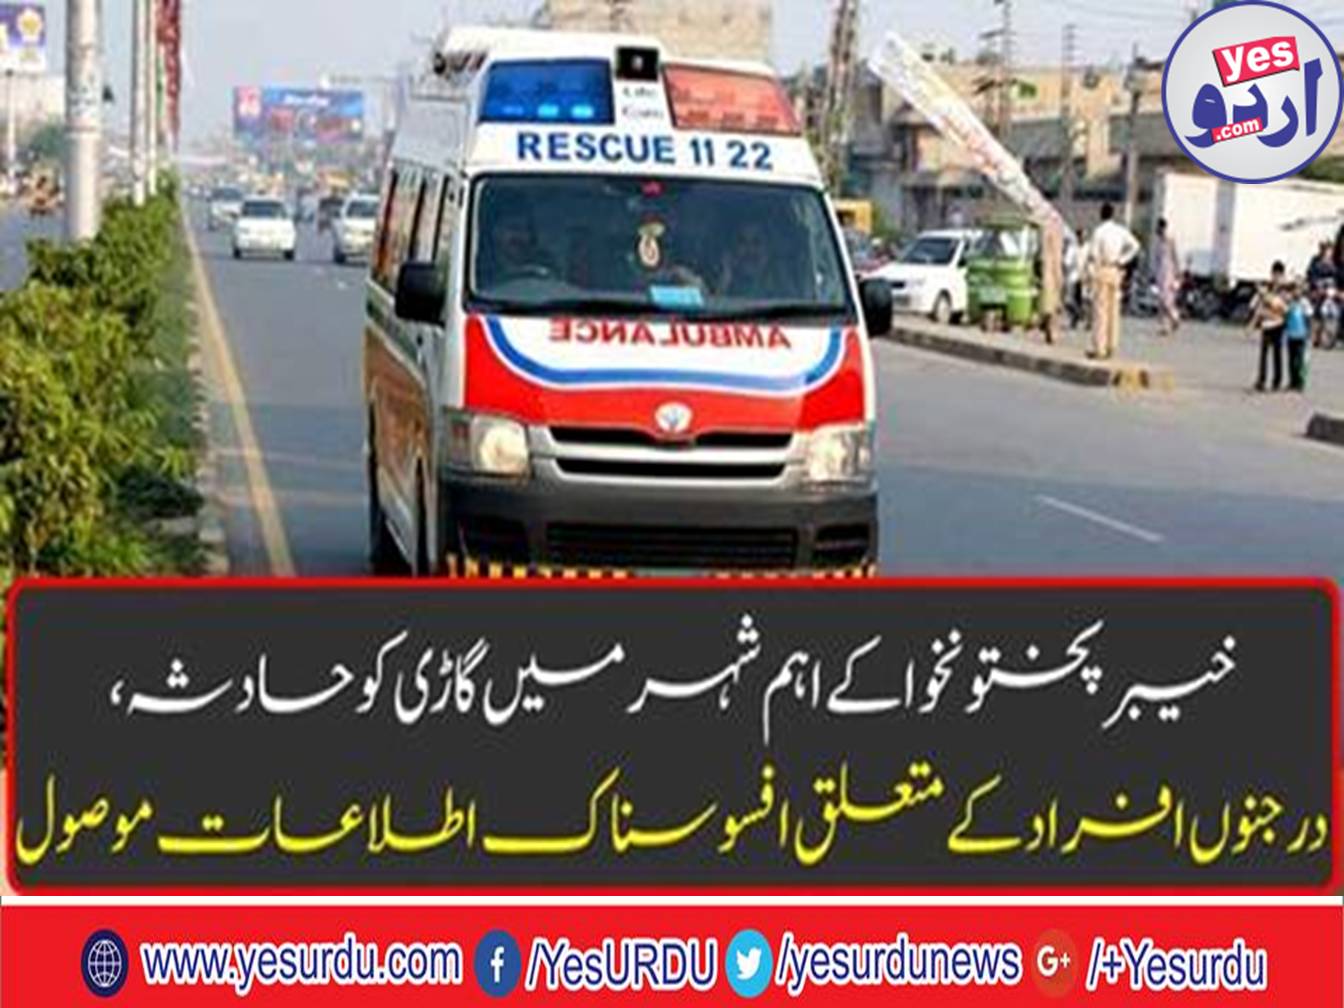 The car crashes in the main city of Khyber Pakhtunkhwa